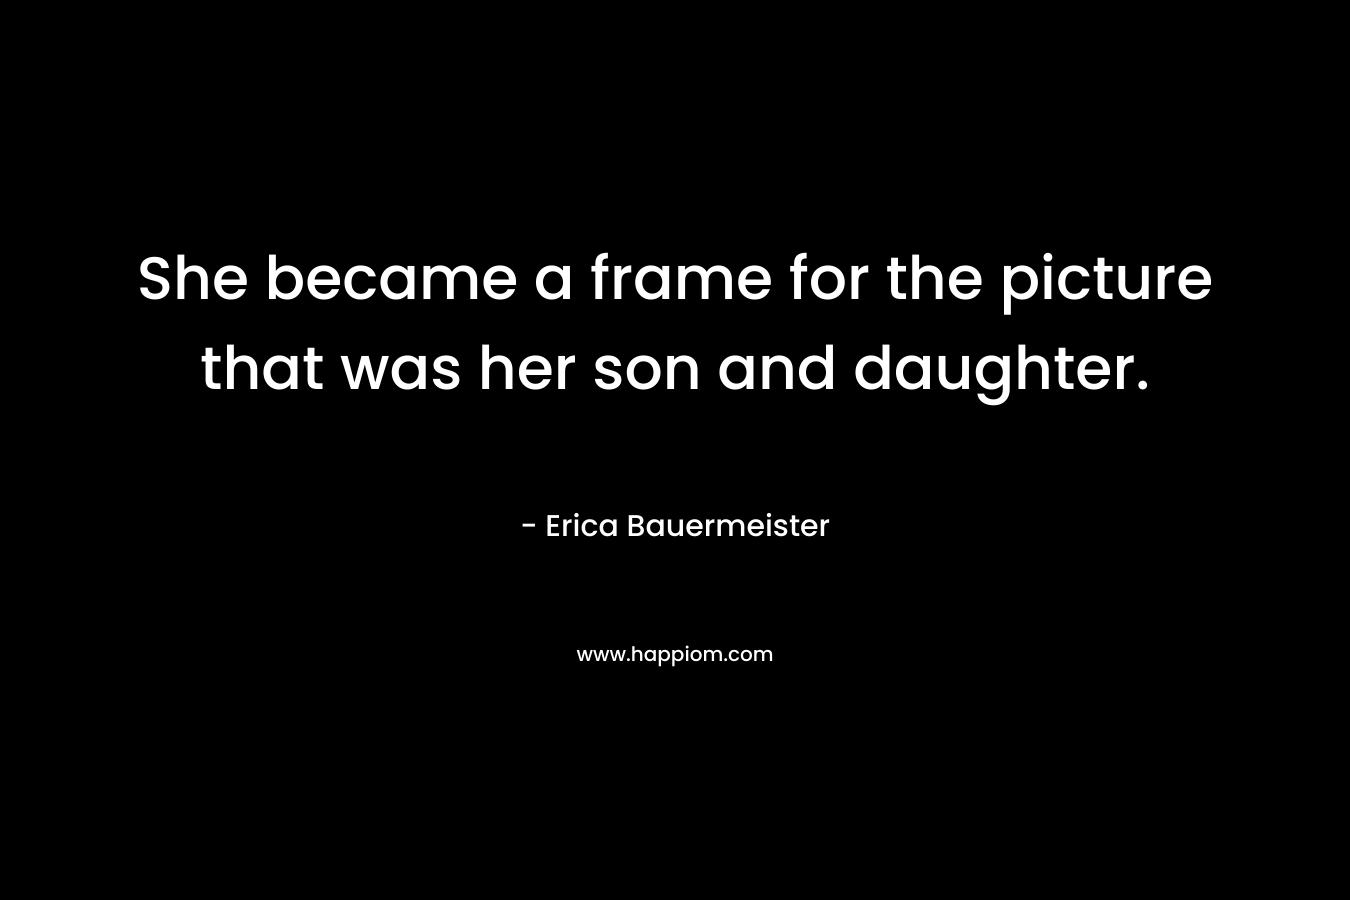 She became a frame for the picture that was her son and daughter. – Erica Bauermeister